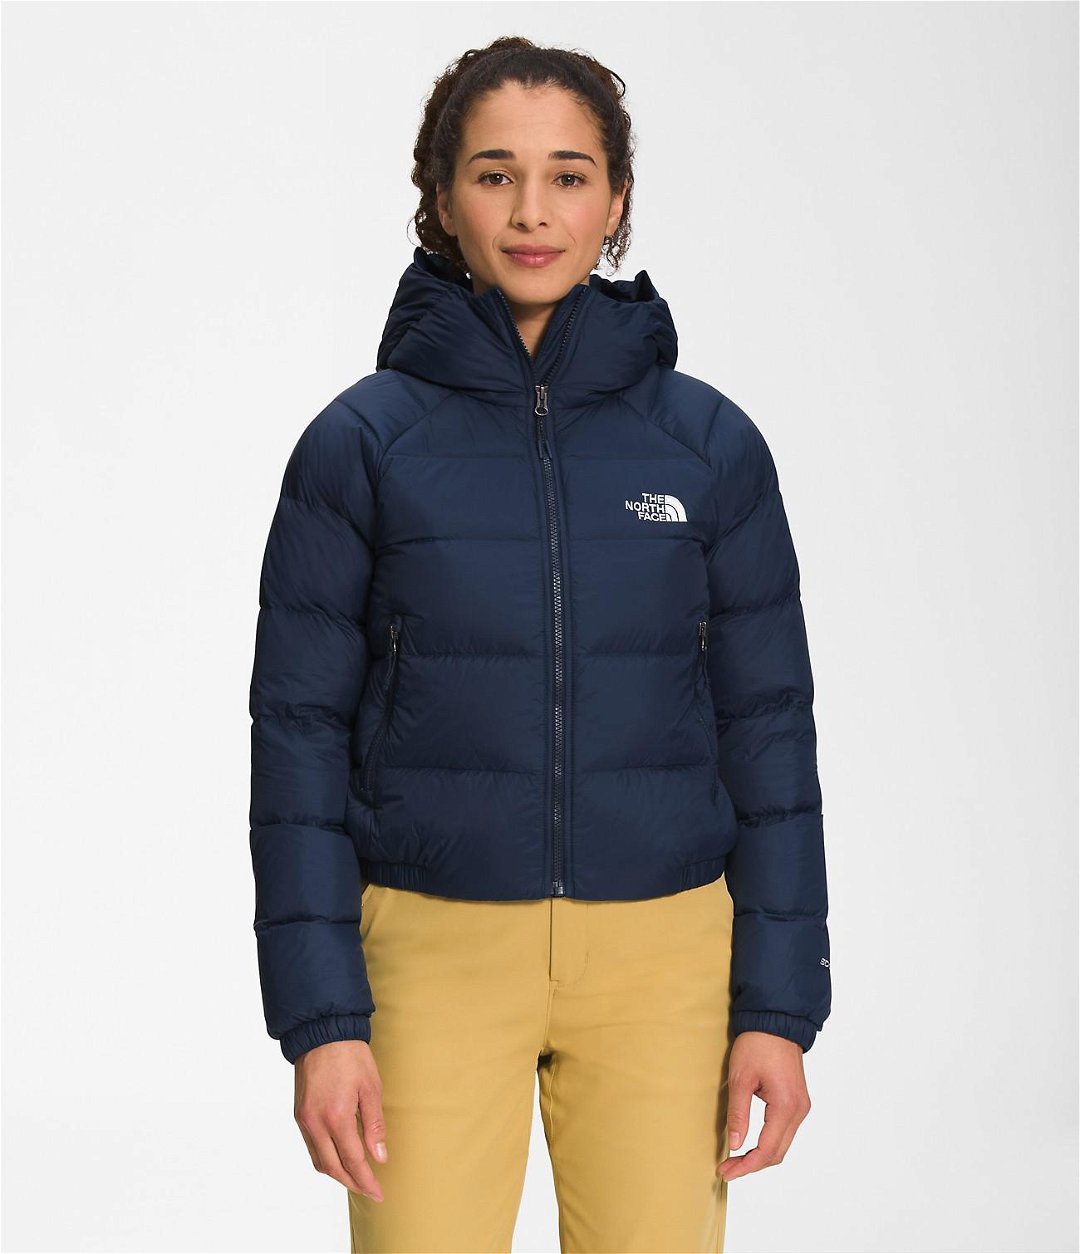 Women’s Hydrenalite™ Down Hoodie by THE NORTH FACE | jellibeans